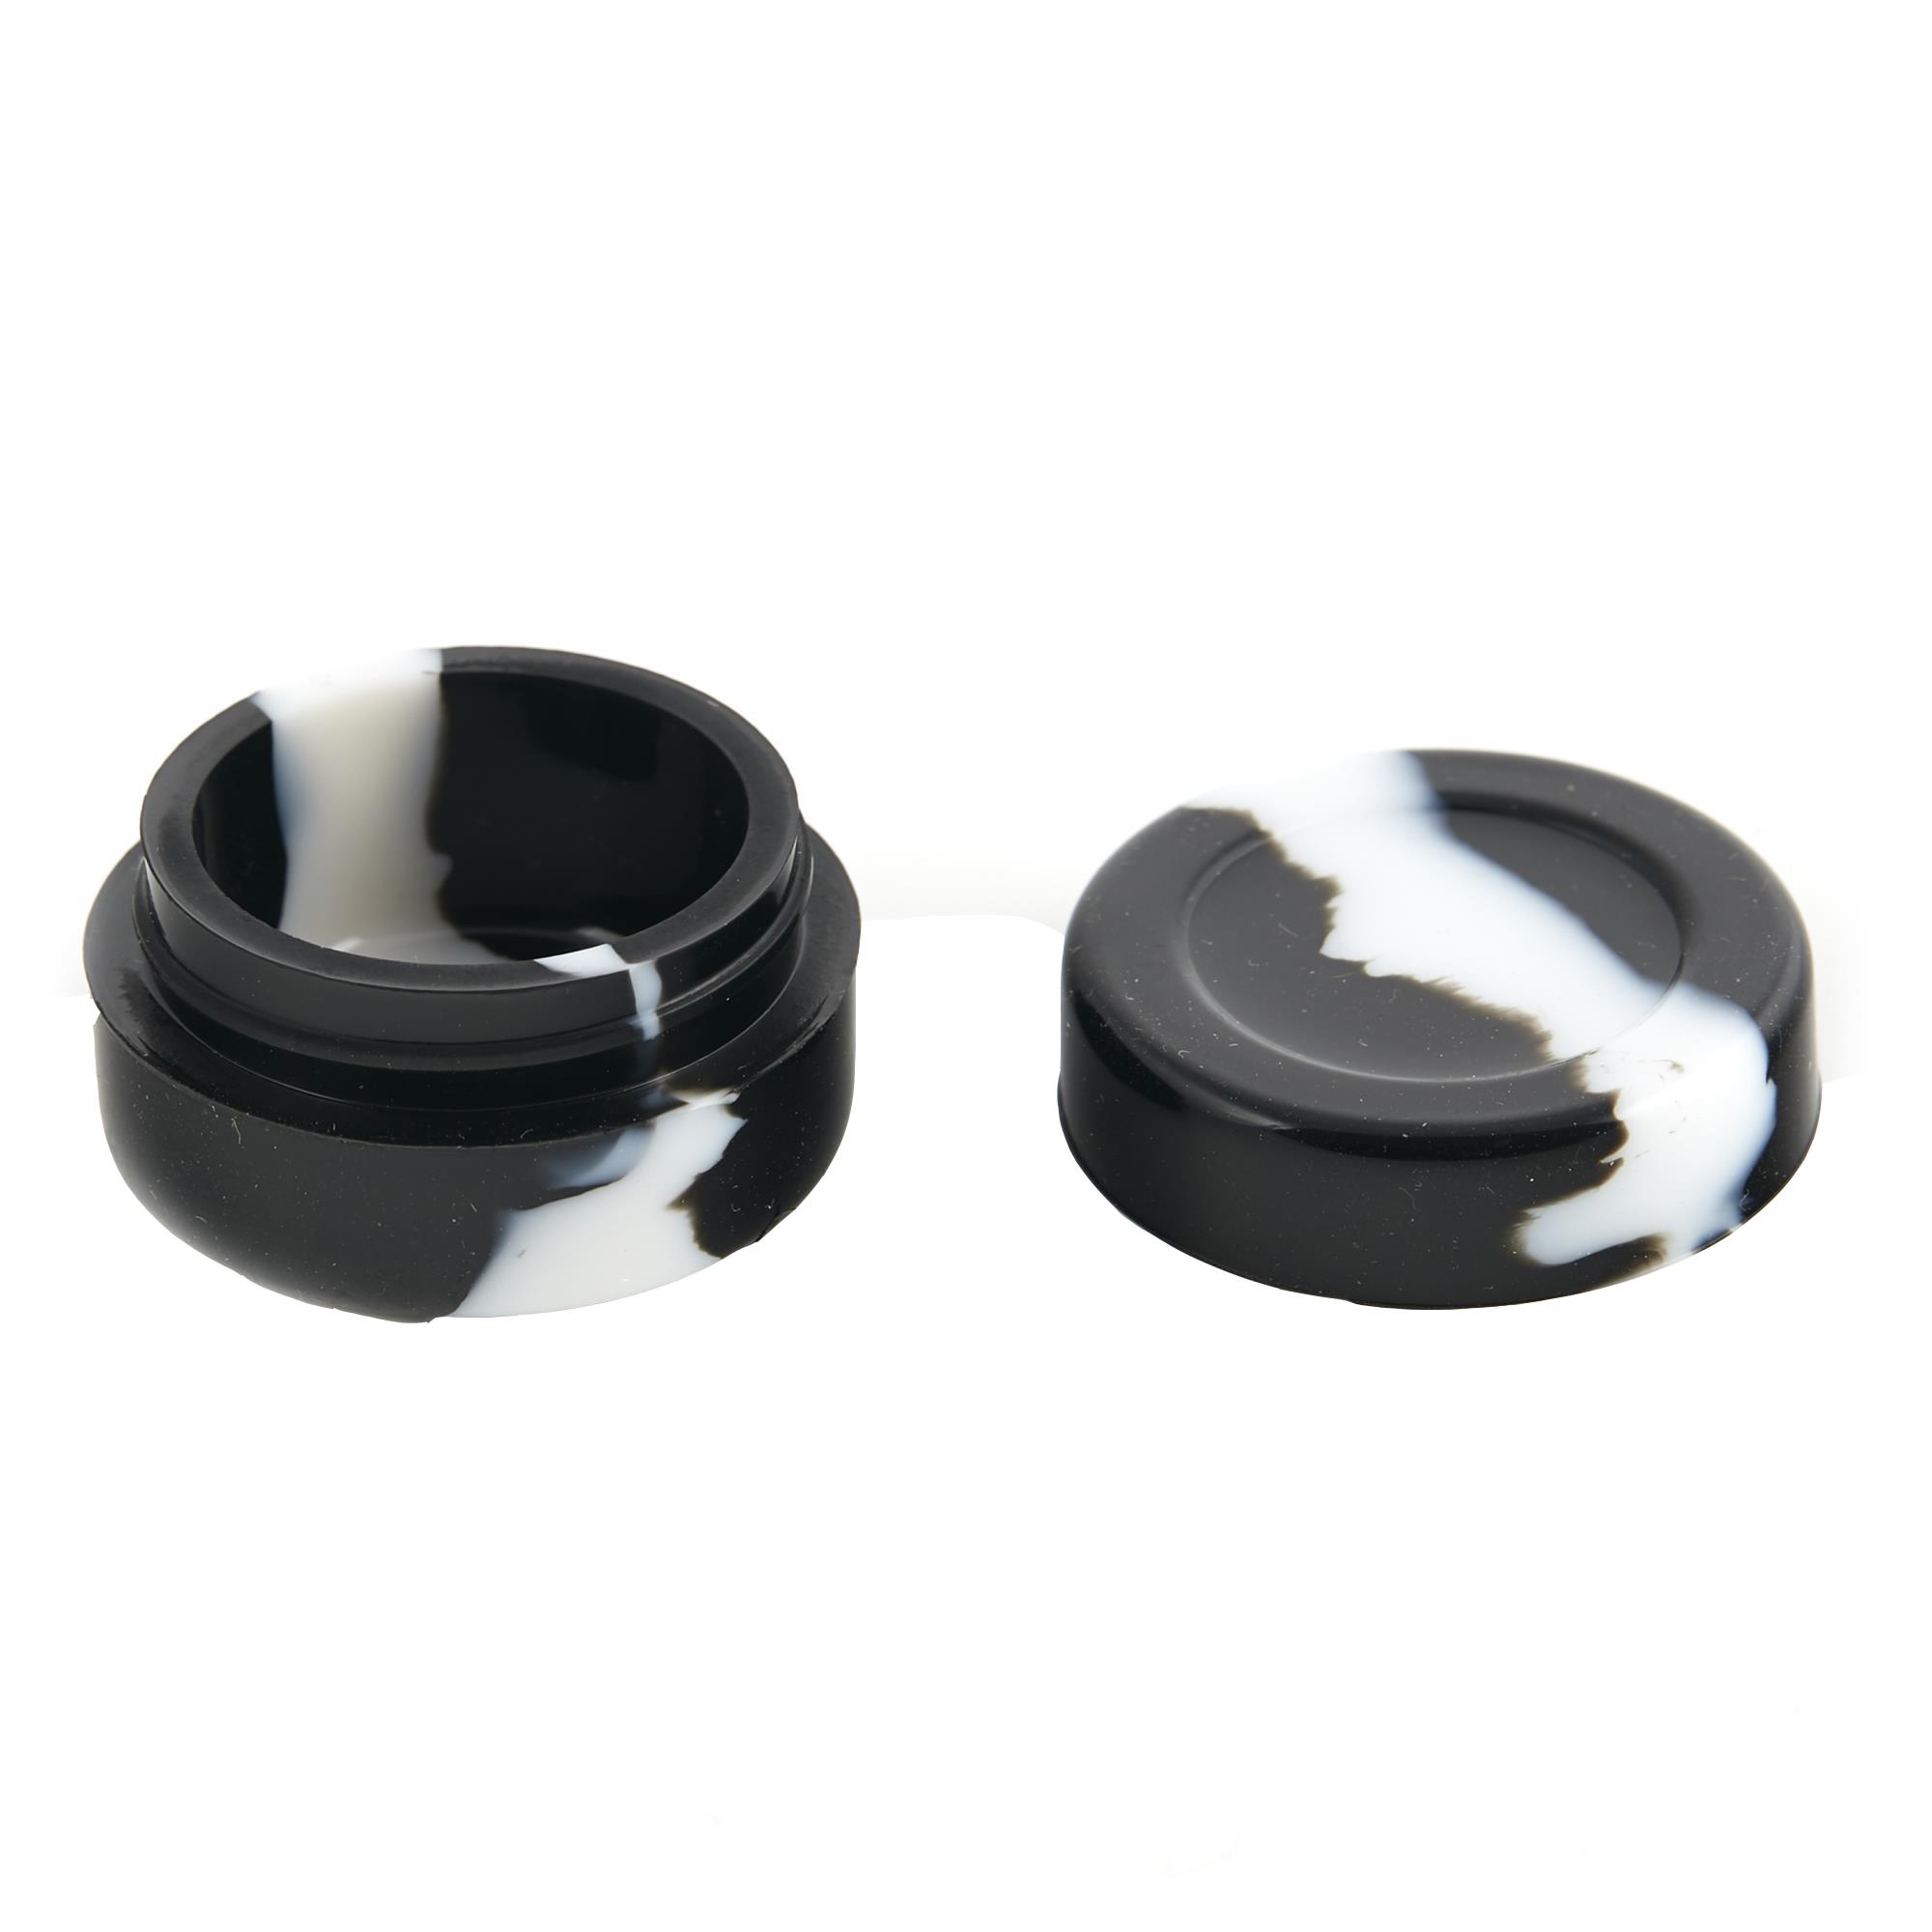 SILICONE PUCK CONTAINER